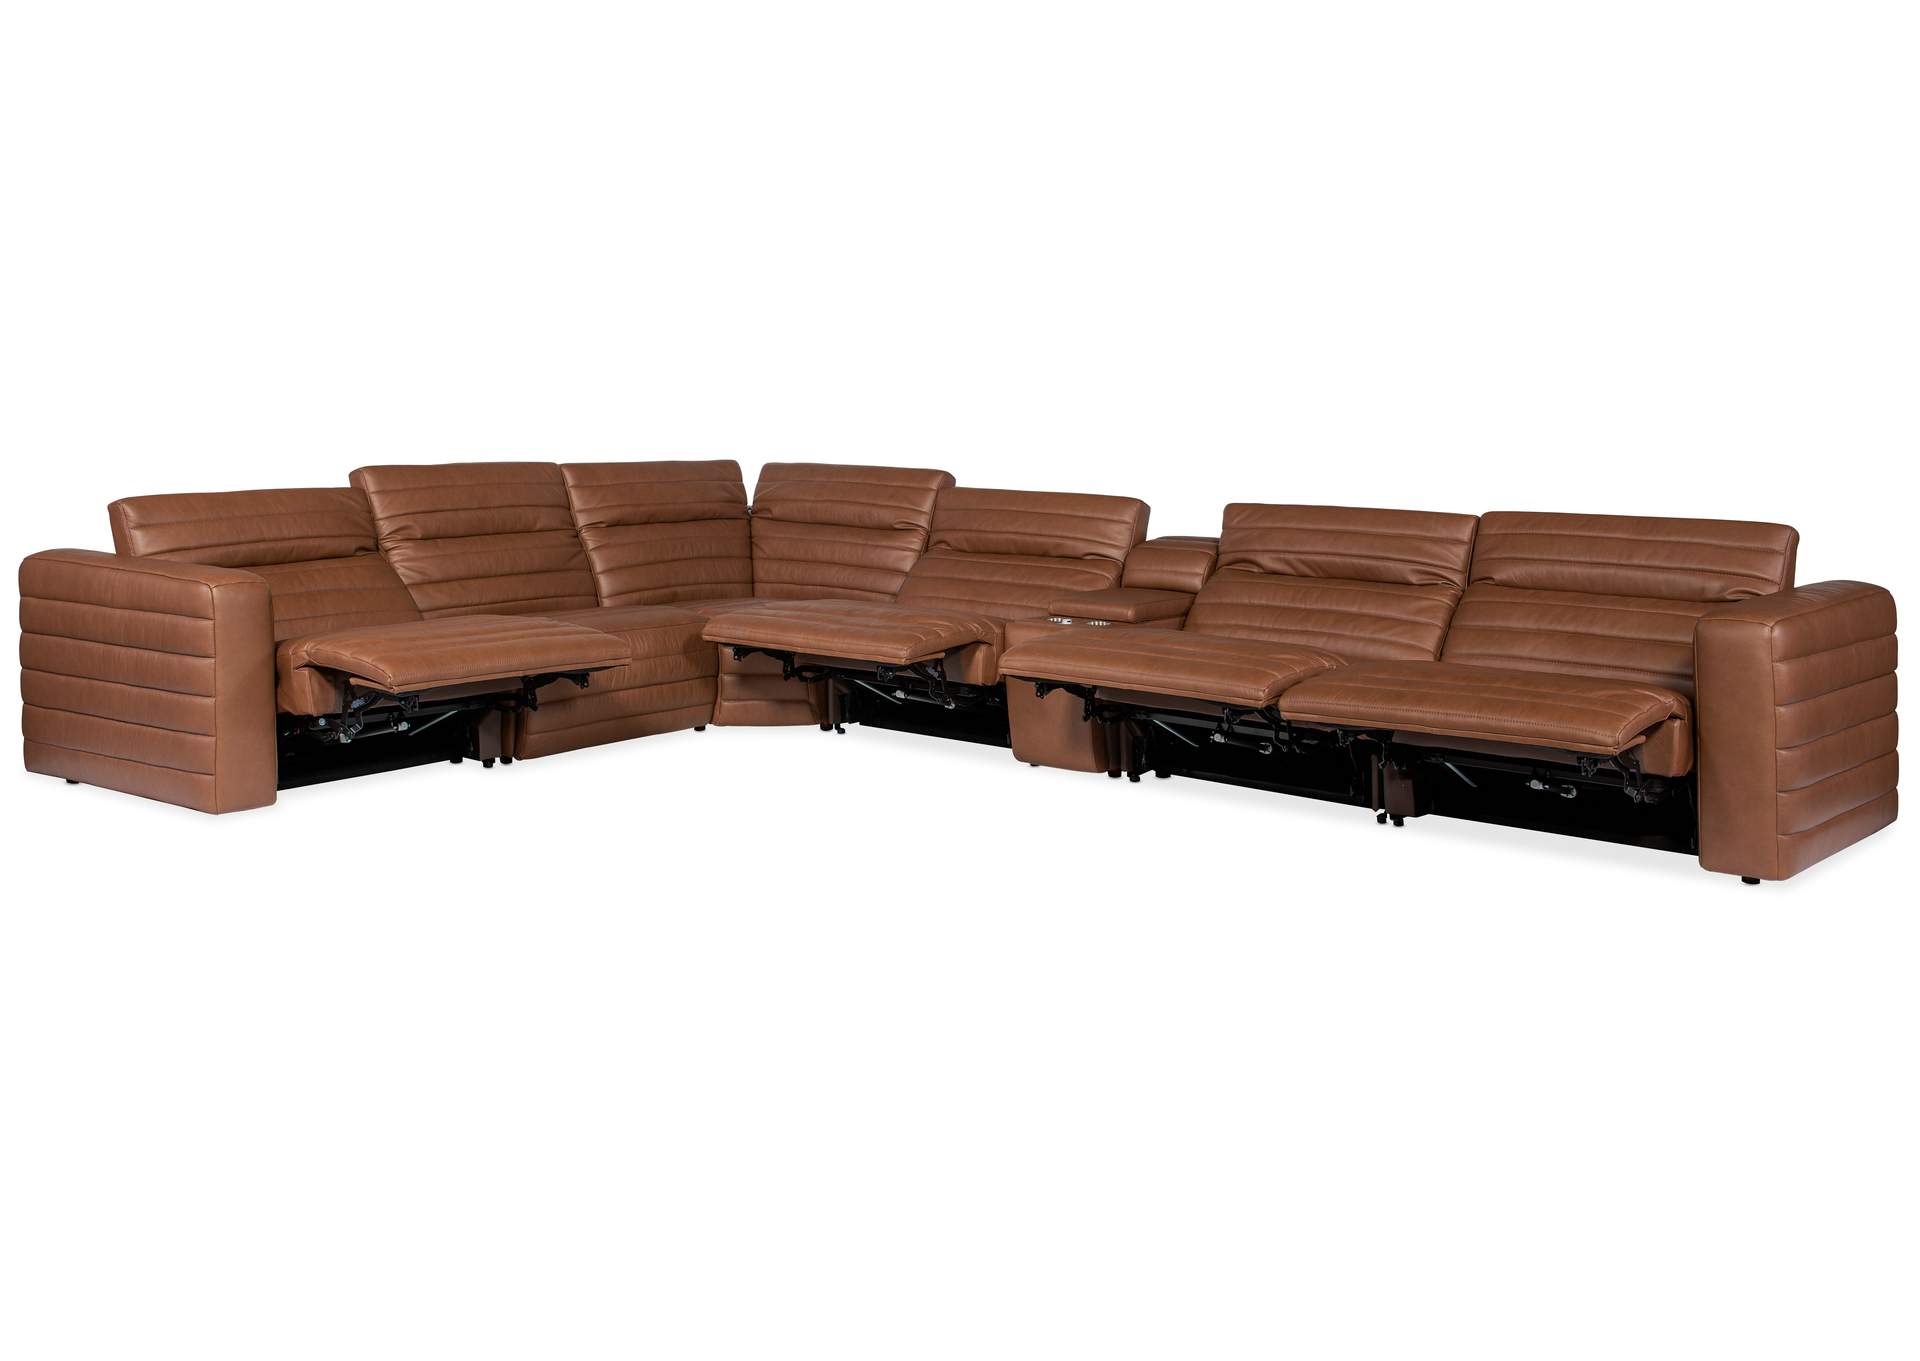 Chatelain 6-Piece Power Headrest Sectional with 2 Power Recliners,Hooker Furniture